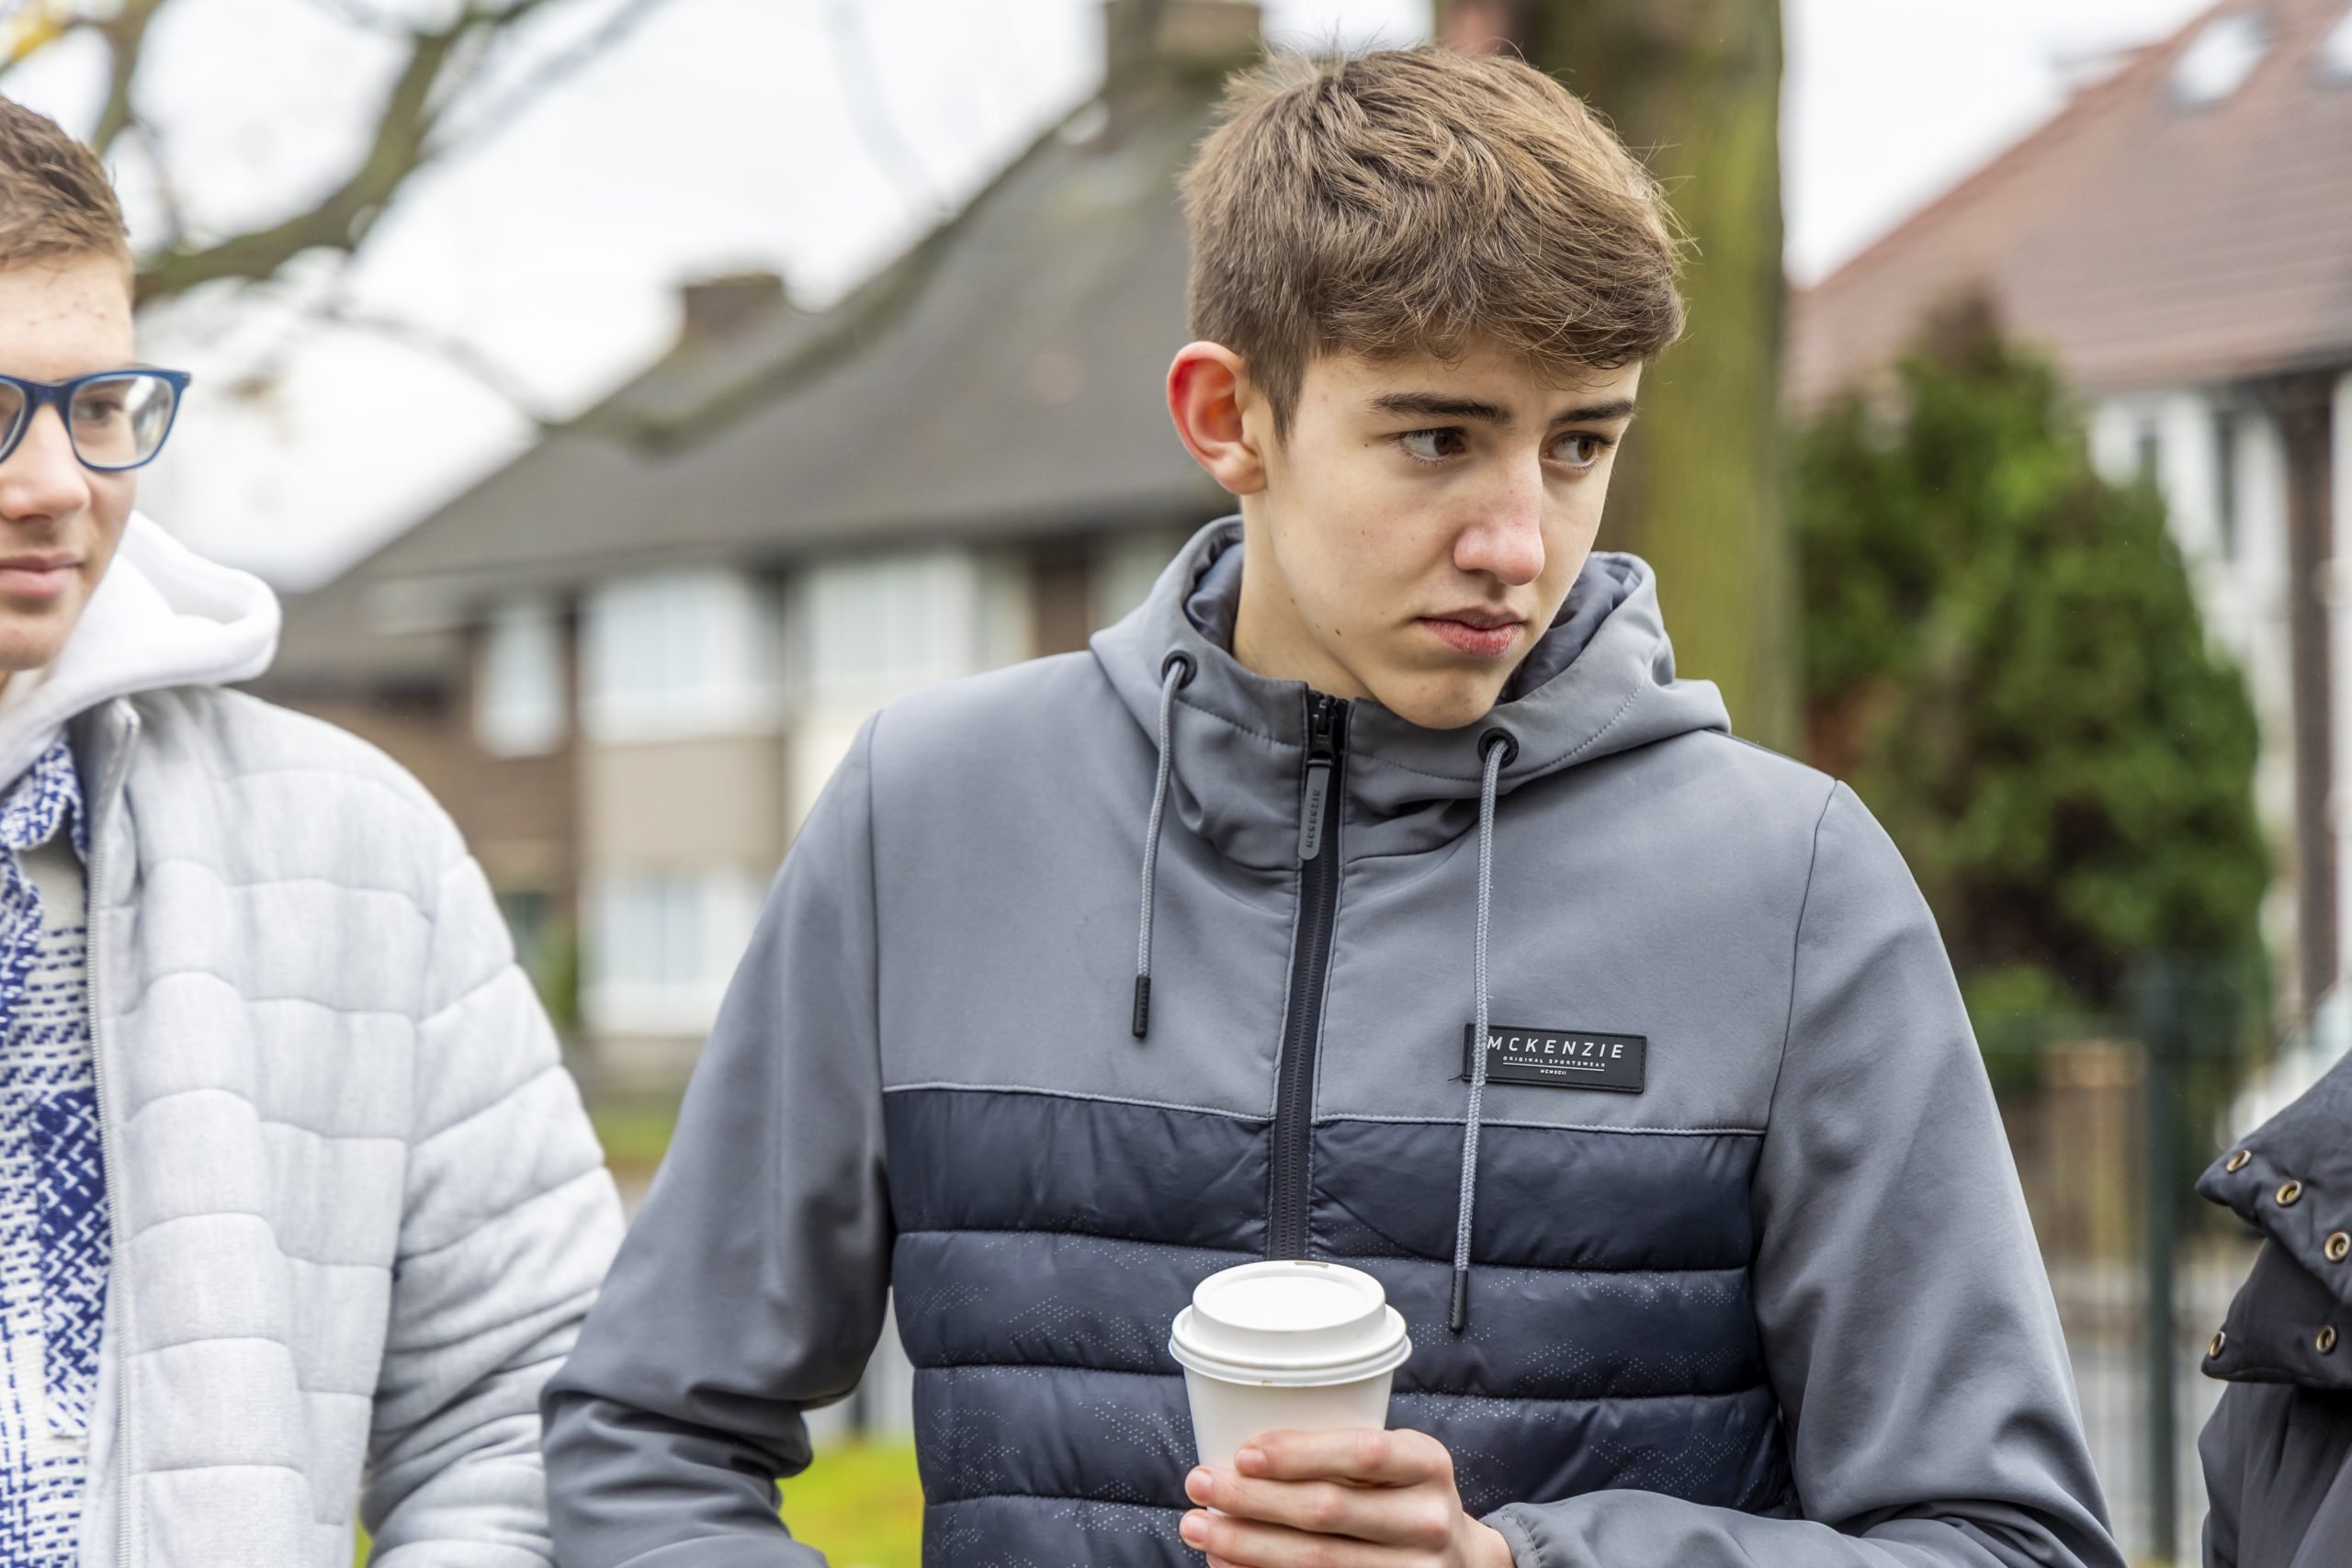 A young person is standing outside holding a coffee to cope with the effects of the morning after a night of partying